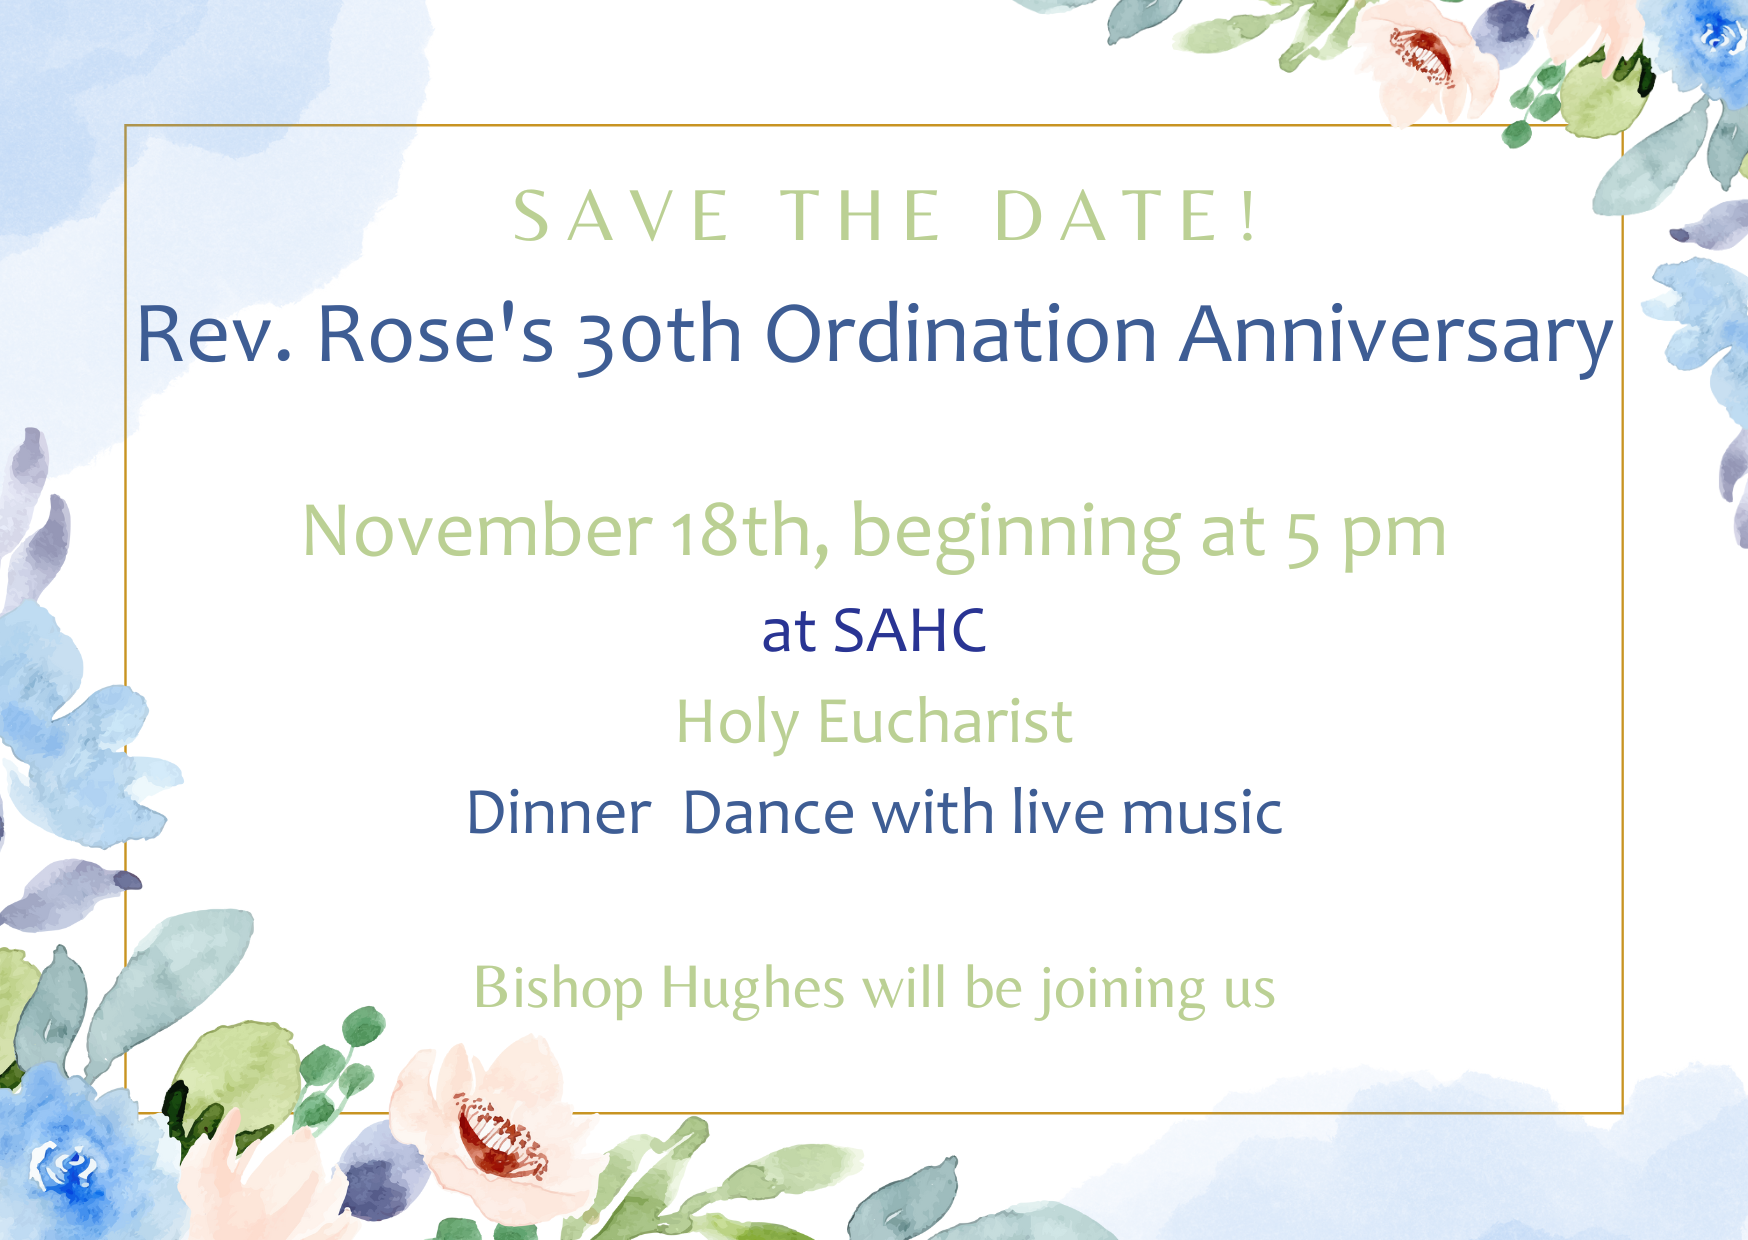 The Rev. Rose Cohen Hassan's 30th Ordination Anniversary